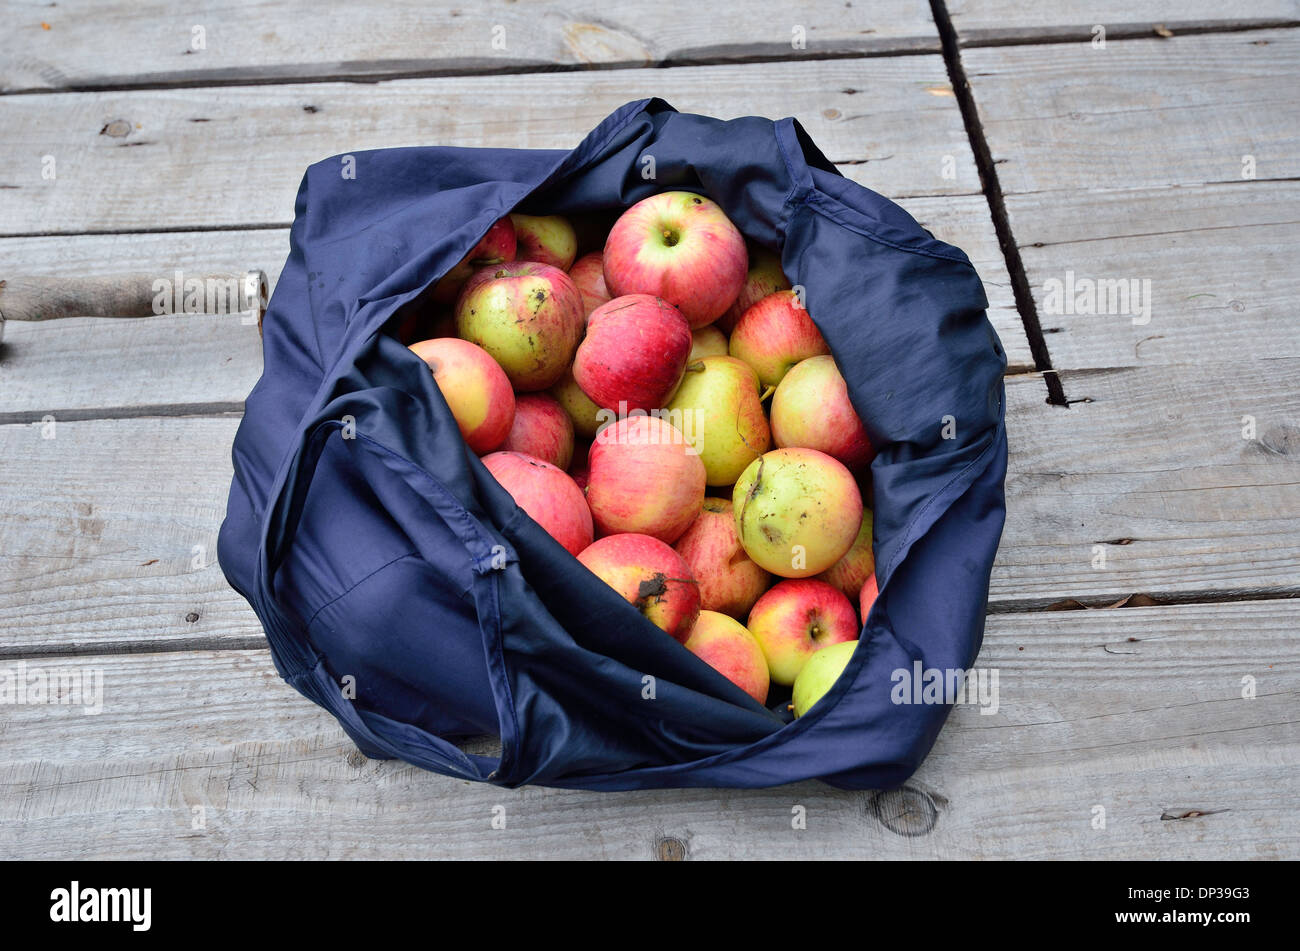 Bag with apples Stock Photo